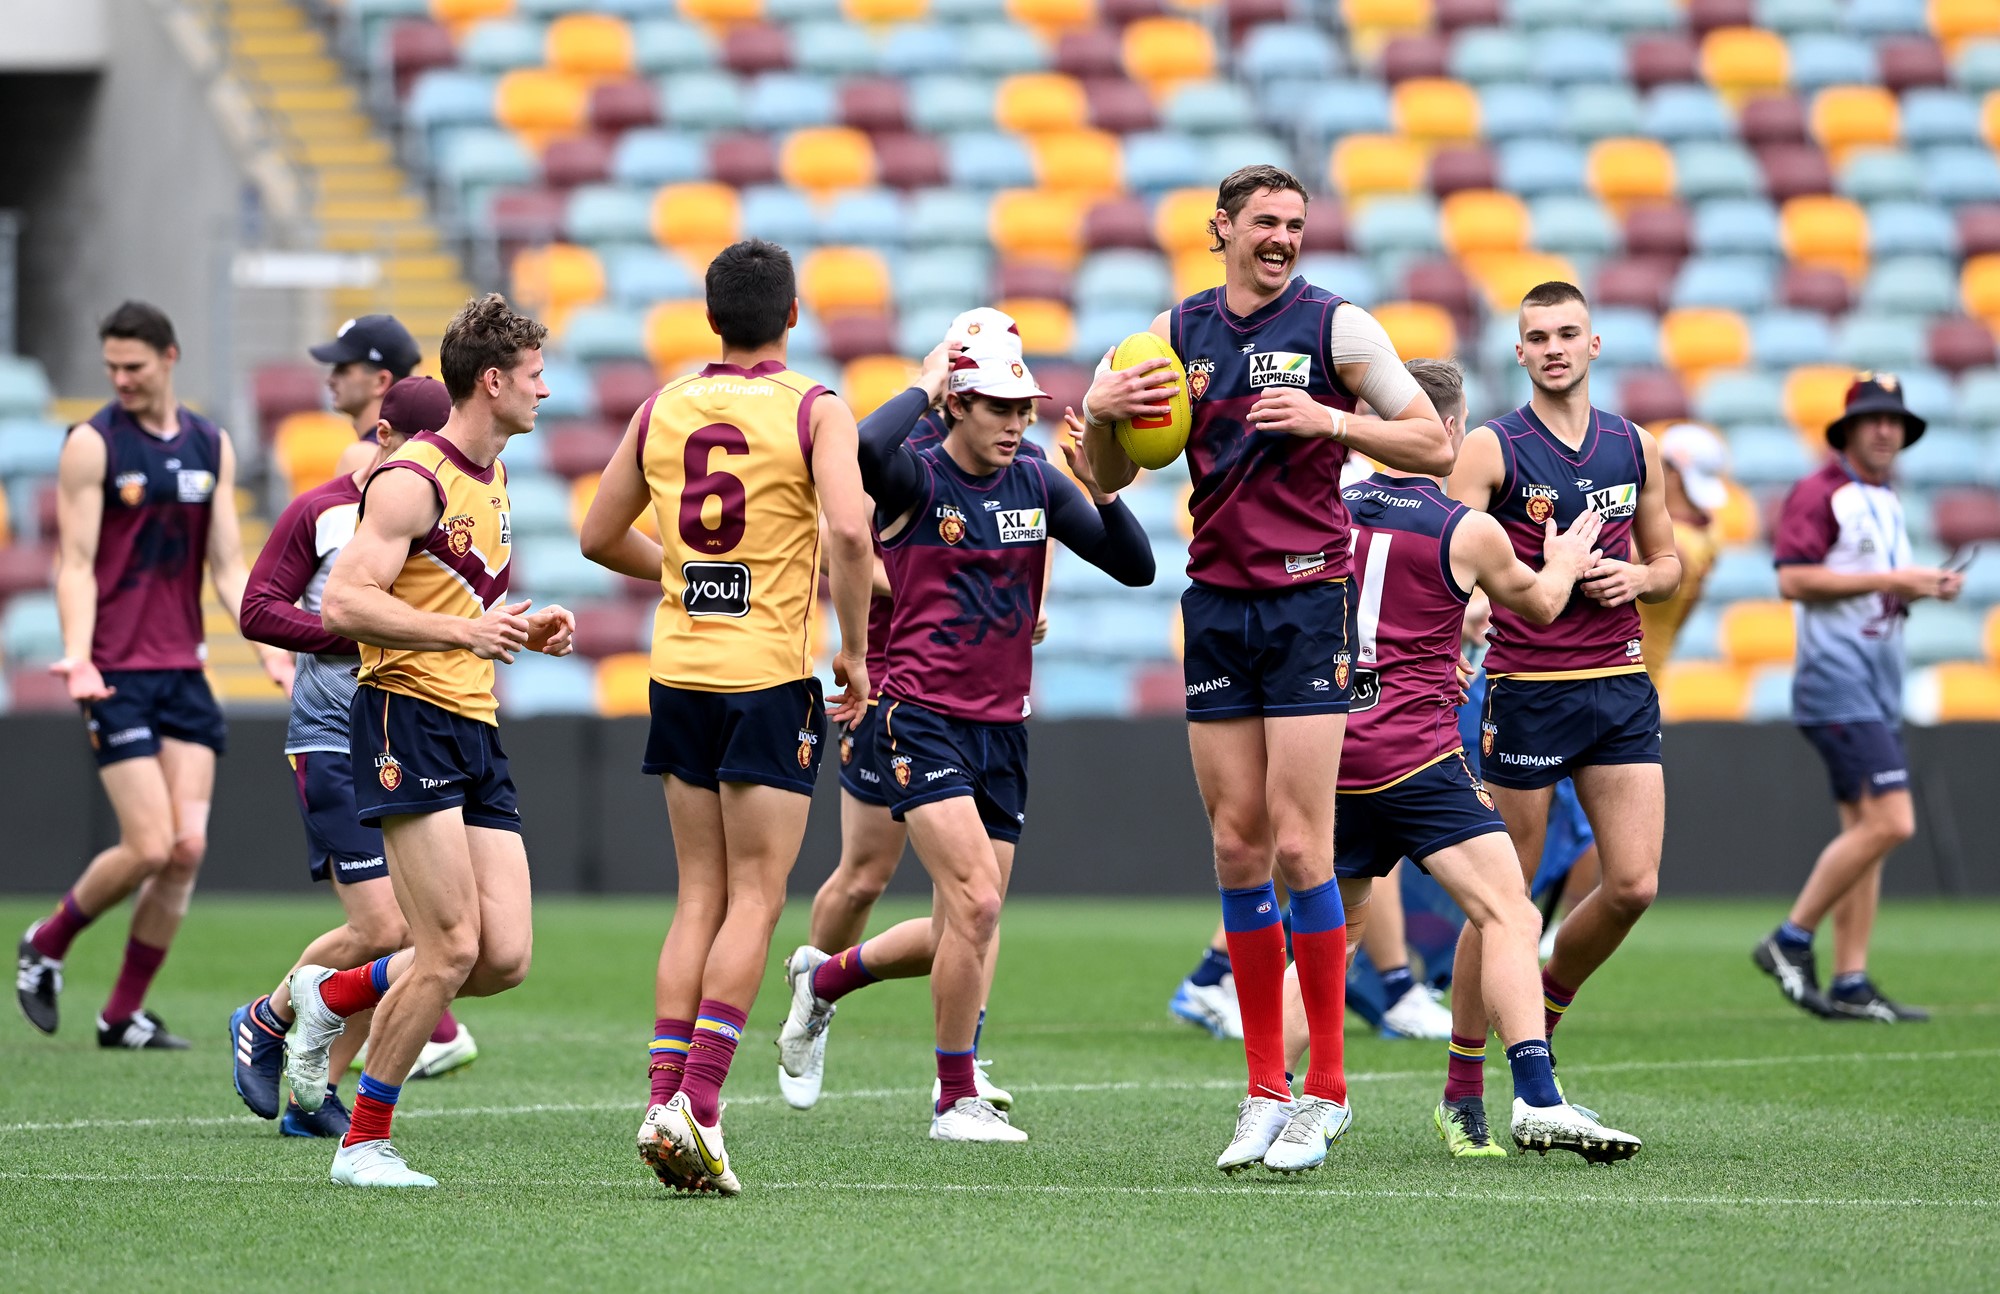 Lions players smile while running on the Gabba